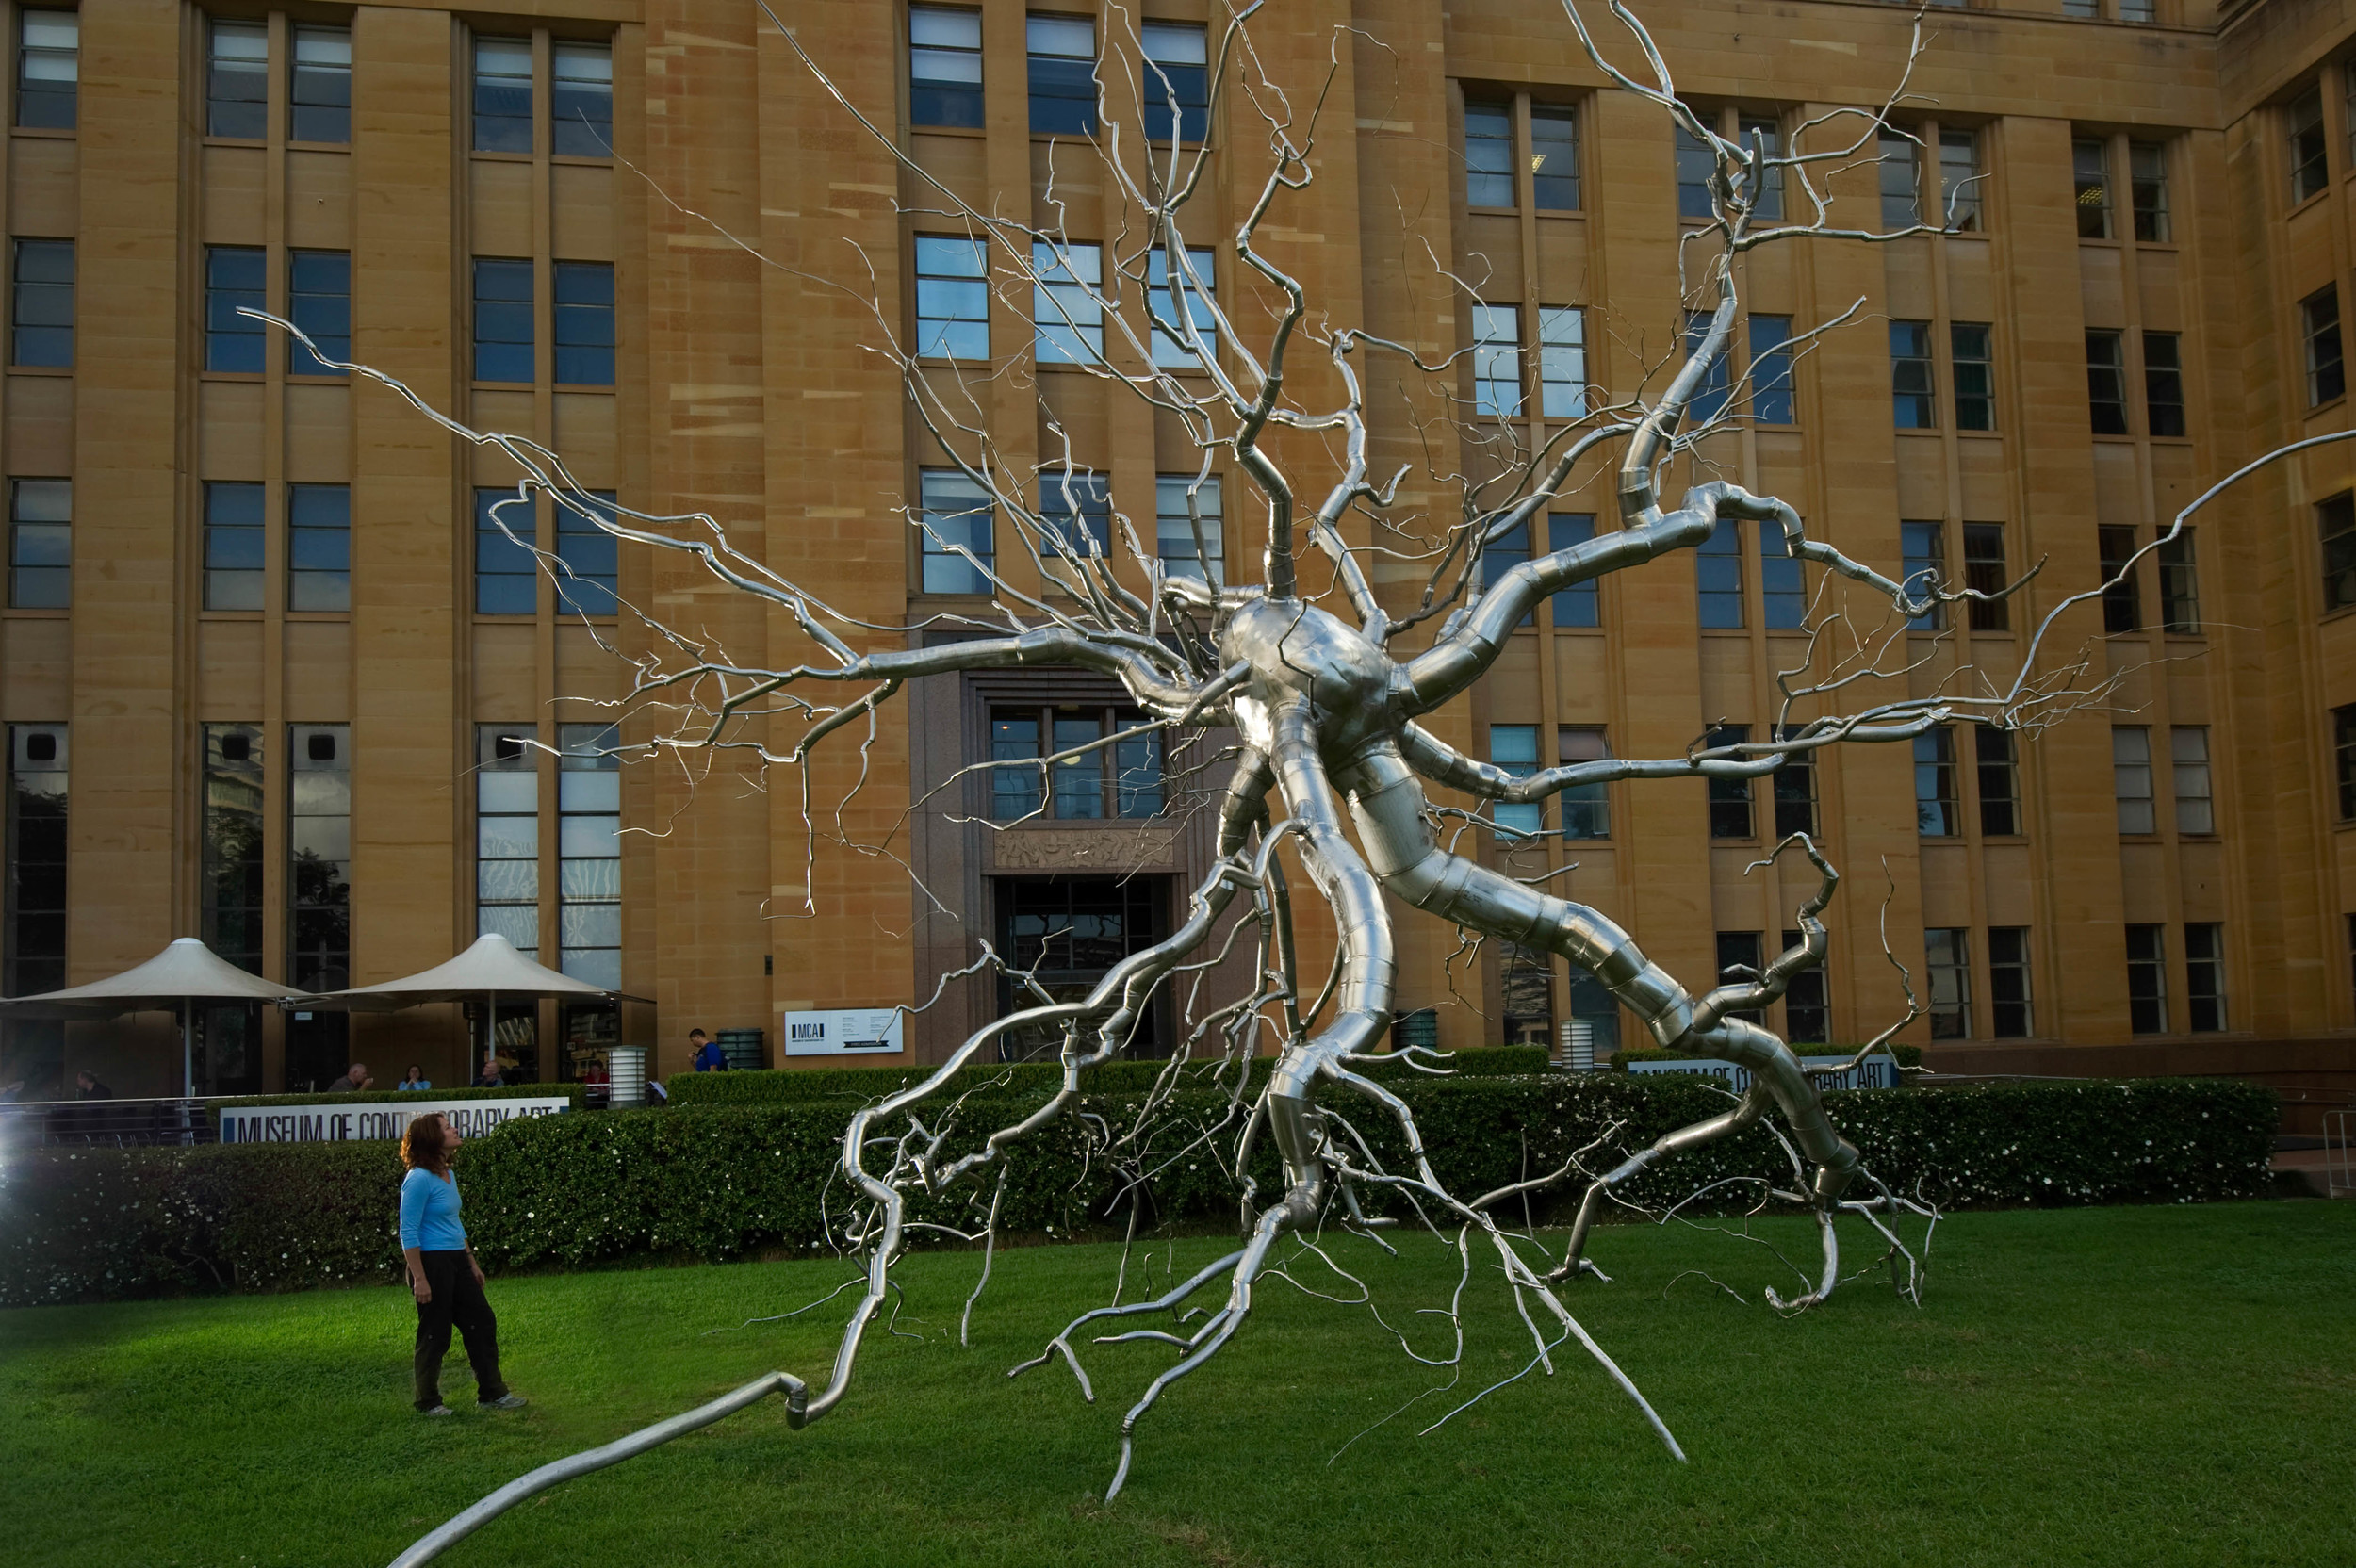  Neuron, 2010, Stainless steel, 41 x 48 x 52 feet   Neuron  &nbsp;represents the exploration of the dendritic structures of the human body, specifically, the brain and mental processes. &nbsp;Both a sculptural and conceptual challenge,&nbsp;  Neuron 